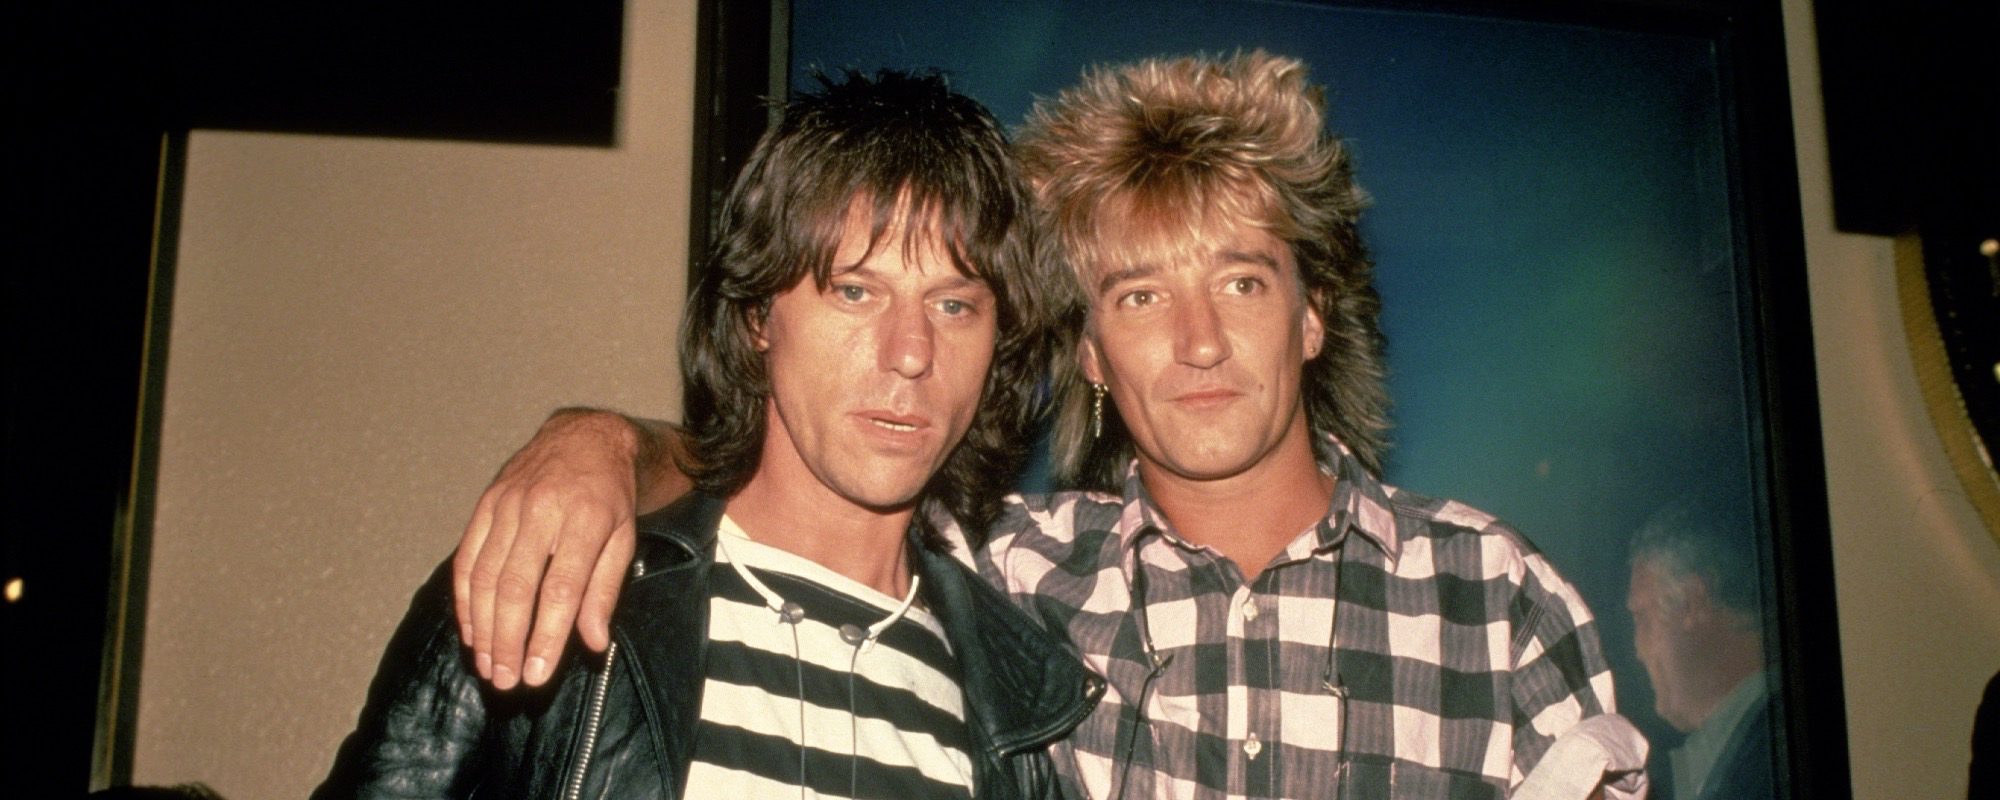 4 Songs You Didn’t Know Rod Stewart and Jeff Beck Wrote Together